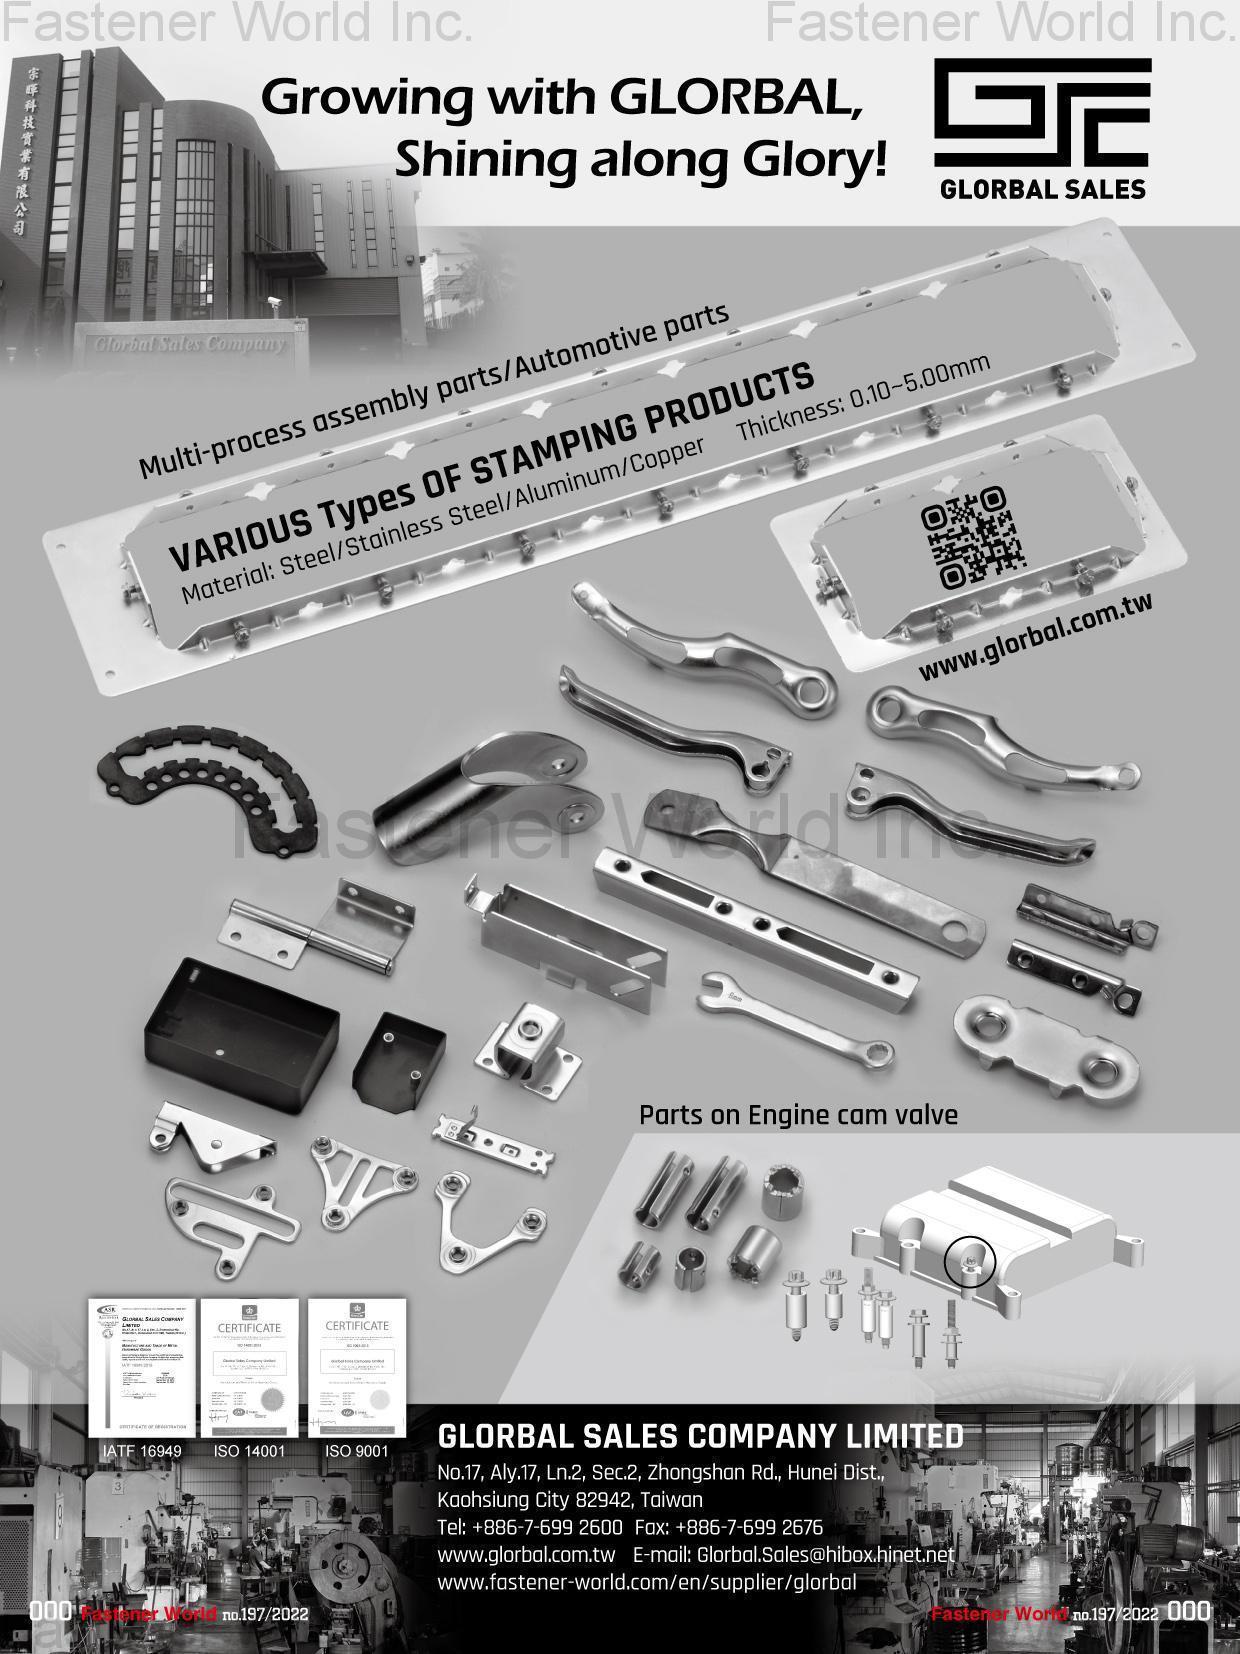 GLORBAL SALES COMPANY LIMITED , Various of Stamping Products, Multi-process Assembly Parts, Automotive Parts